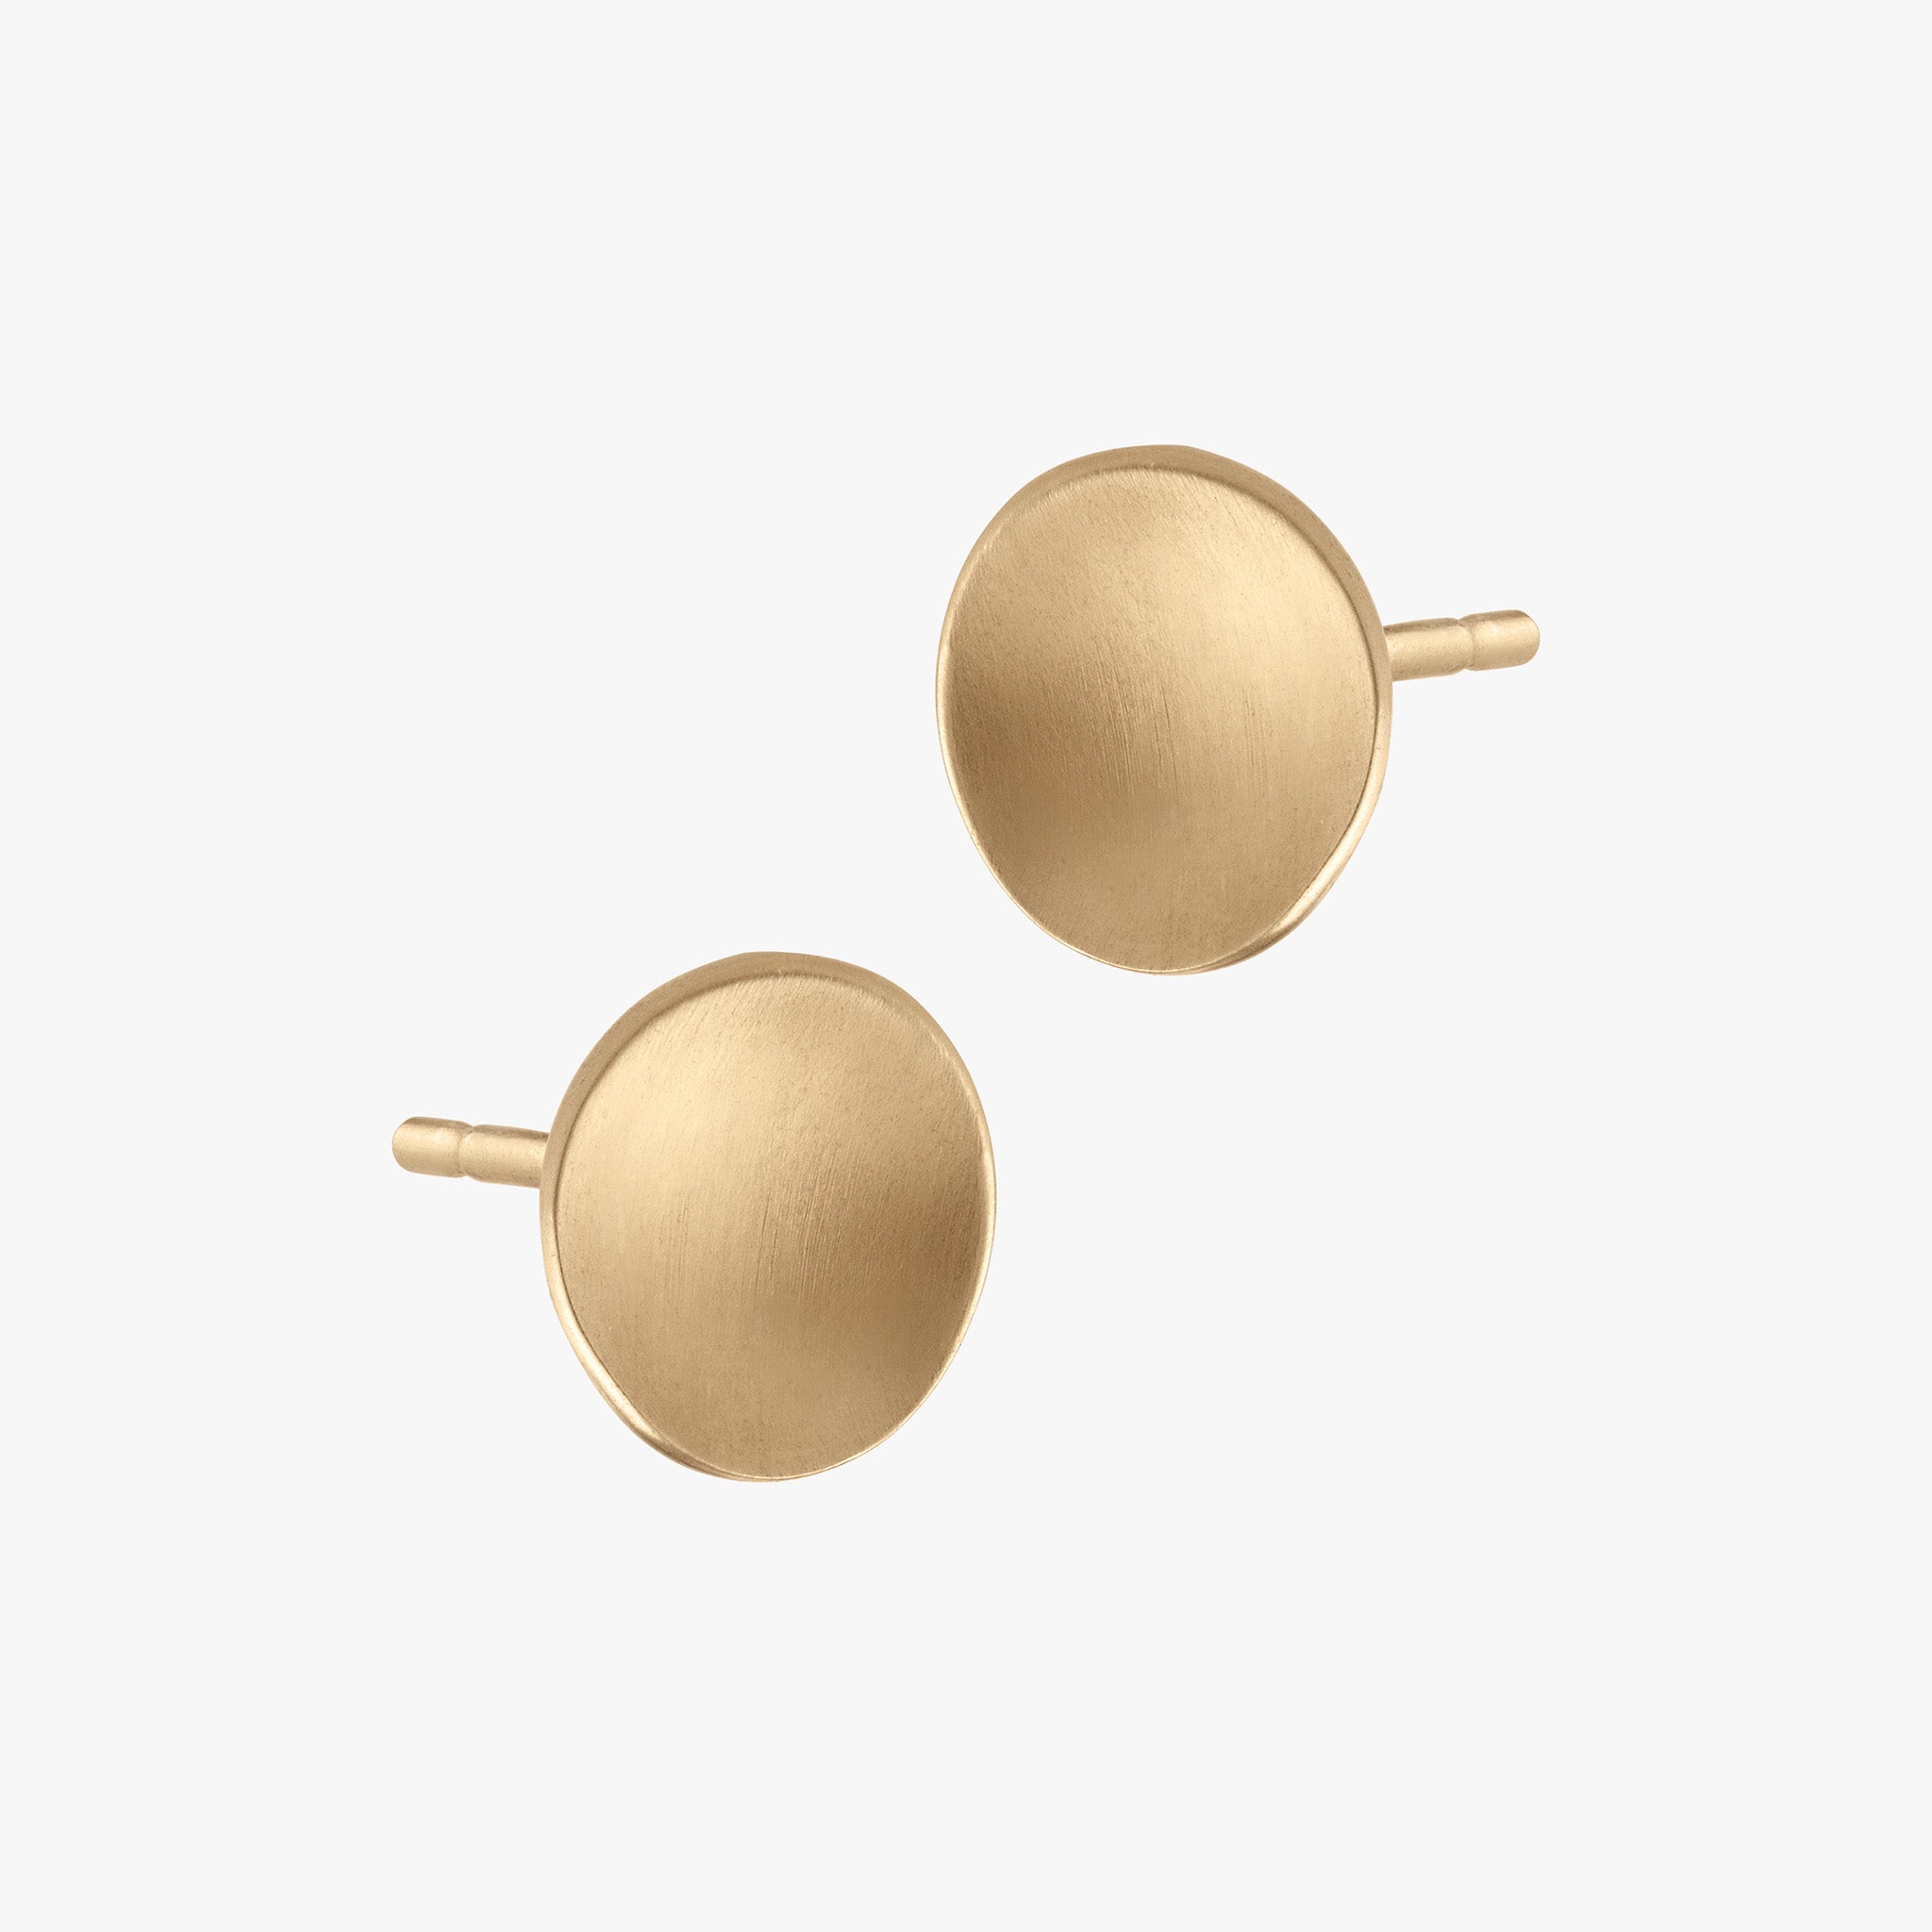 Gold Plated Pearl Studs | Stud Earrings with Freshwater Pearls